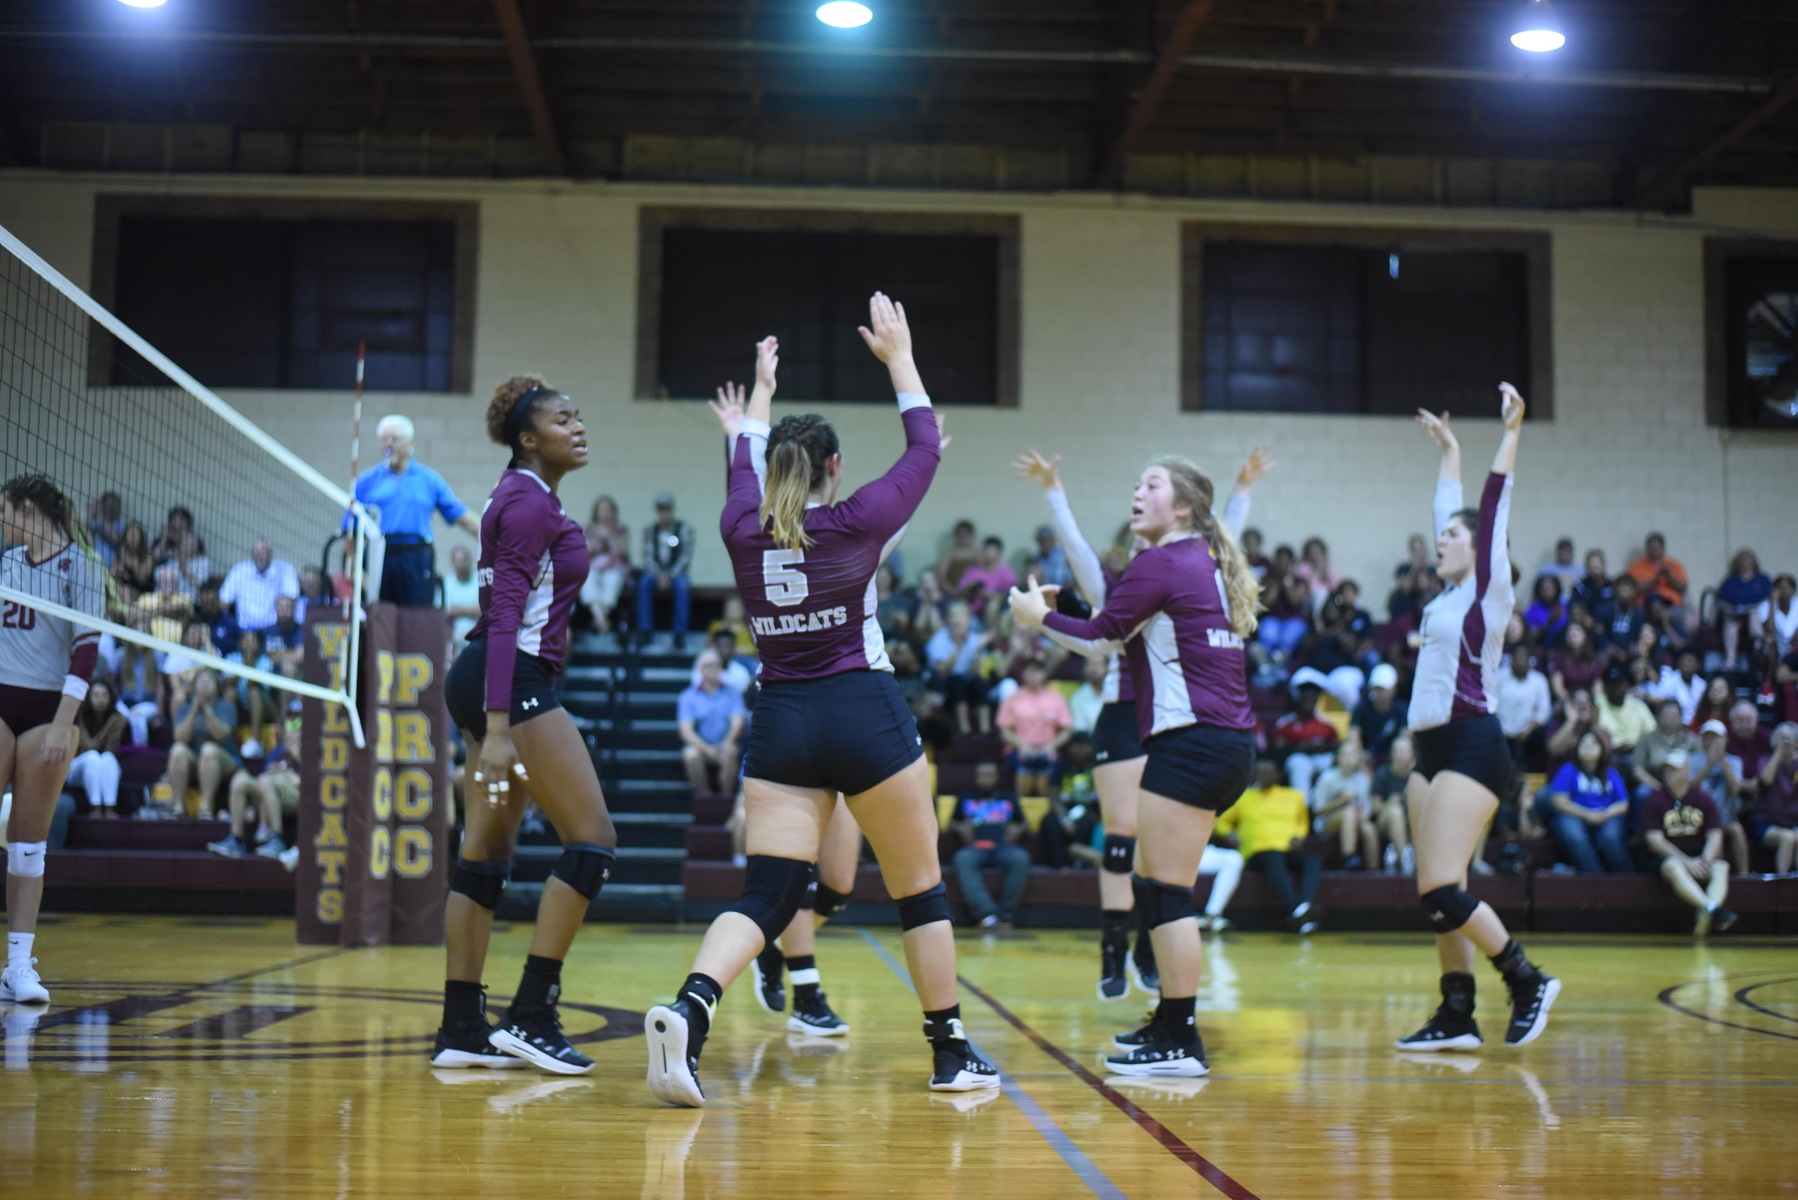 Pearl River's volleyball team defeated visiting Coastal Alabama-East 3-0 (28-26, 25-17, 25-10) on Aug. 24, 2019 at Shivers Gymnasium in Poplarville, Mississippi. PRCC is the first Mississippi junior college to add volleyball as a sport. (KRISTI HARRIS/PRCC ATHLETICS)